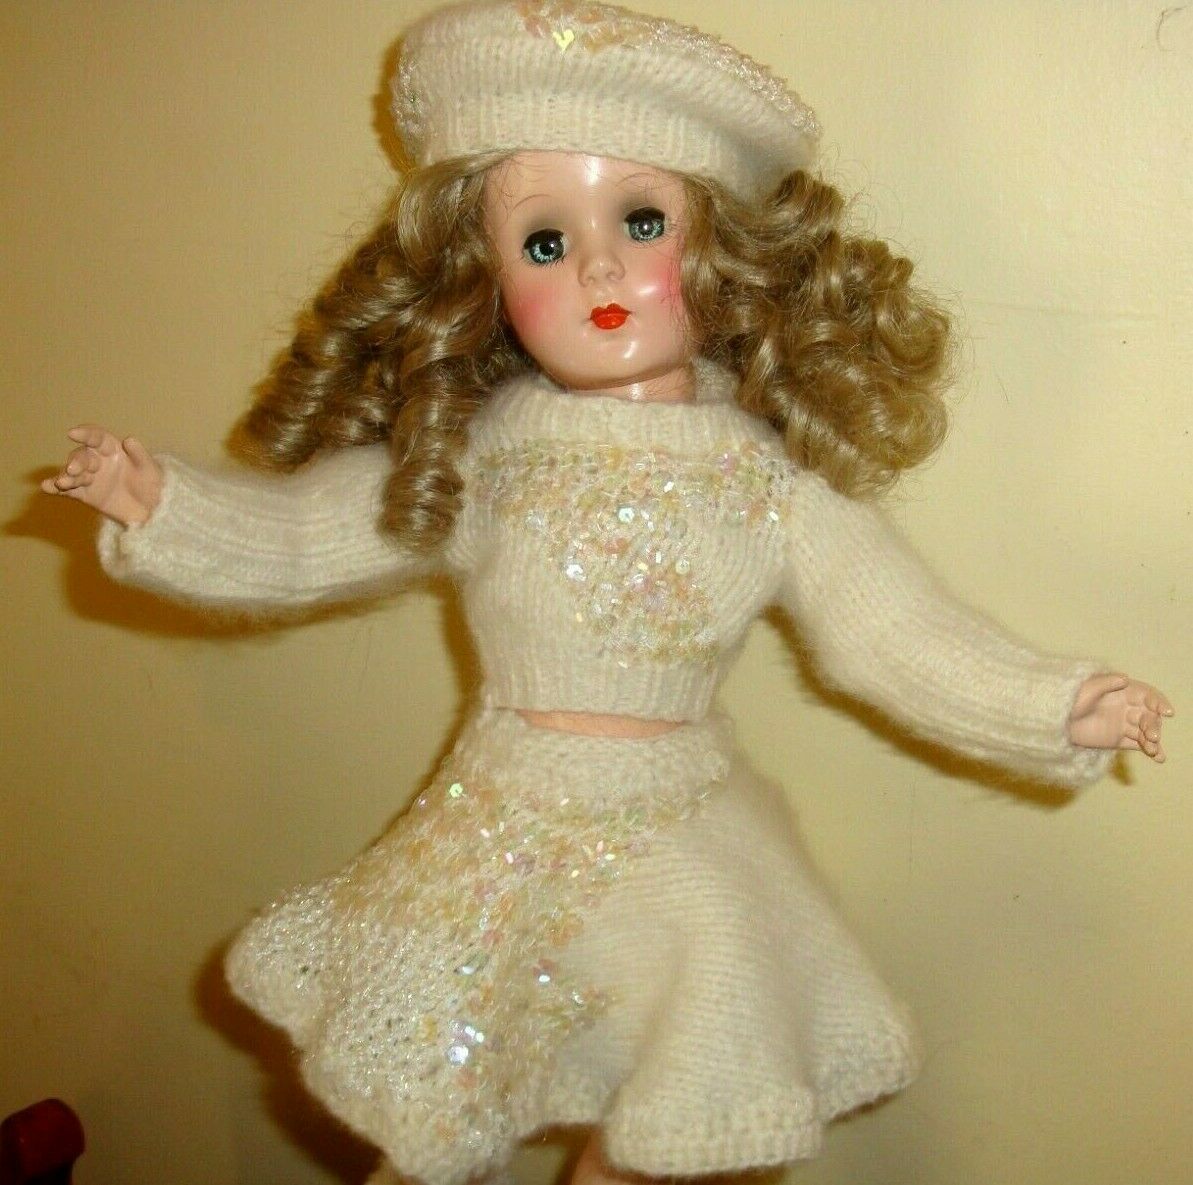 Nancy Ann Style Show Doll 1950s Vintage 18" In Ooak Handmade Skating Outfit